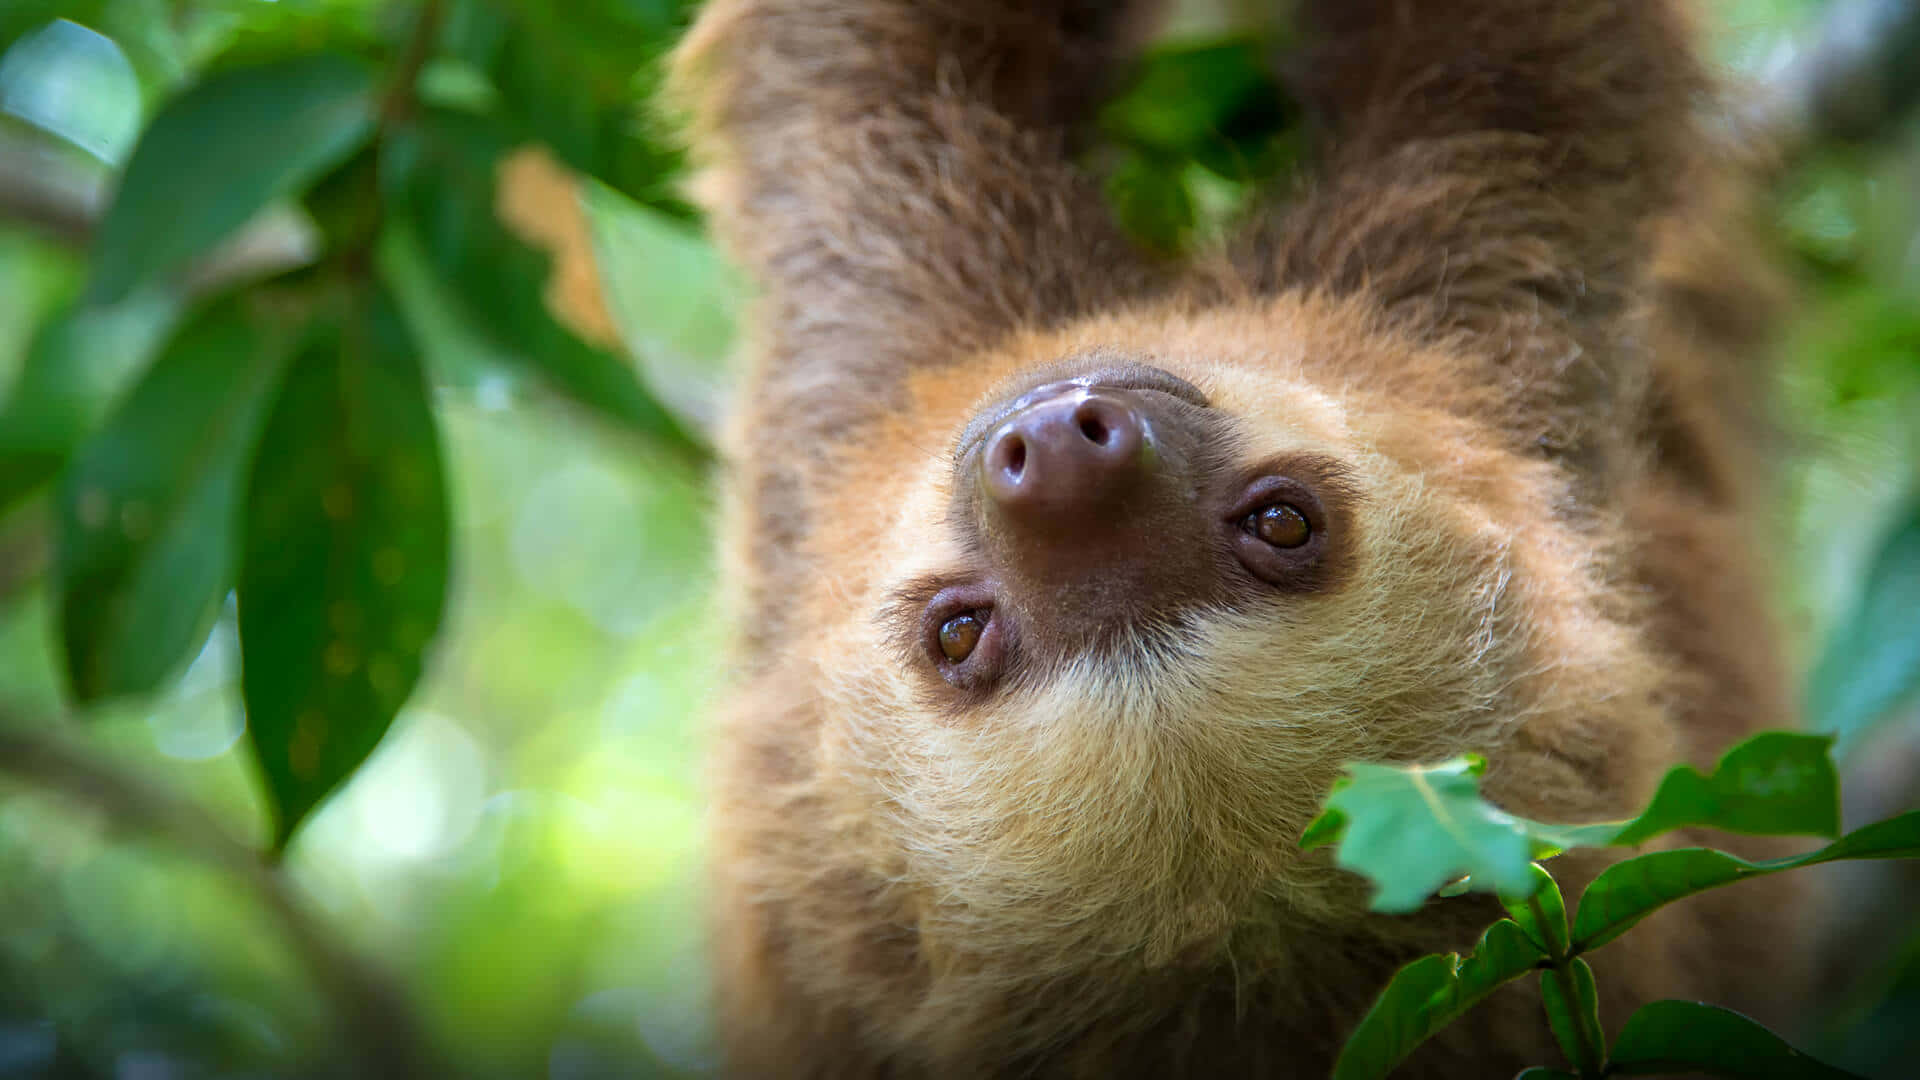 A sloth hangs from a tree, taking a moment to enjoy life.